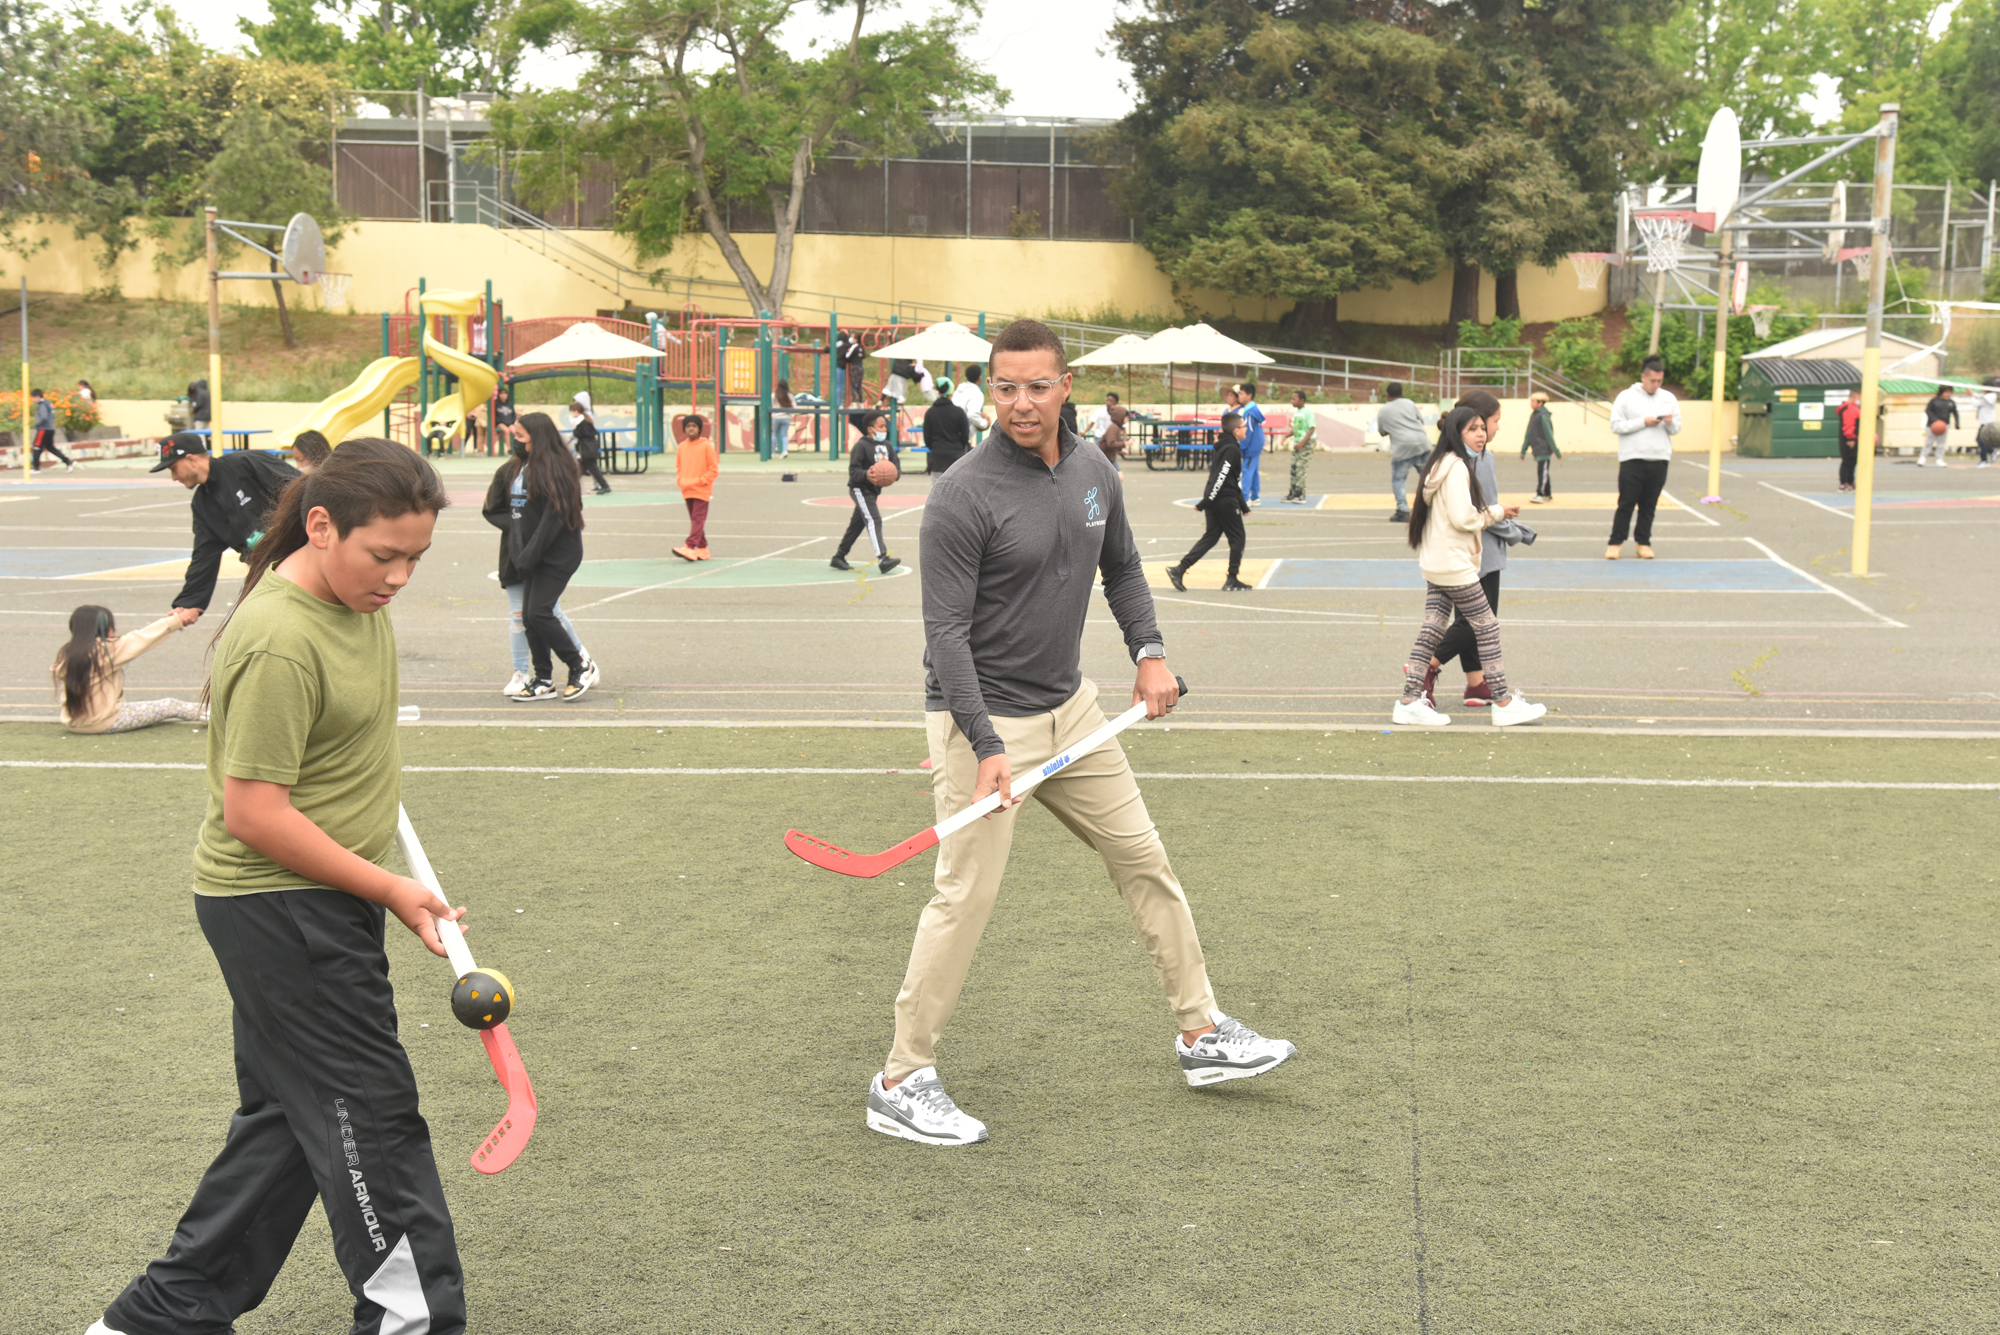 adult and kids playing hockey